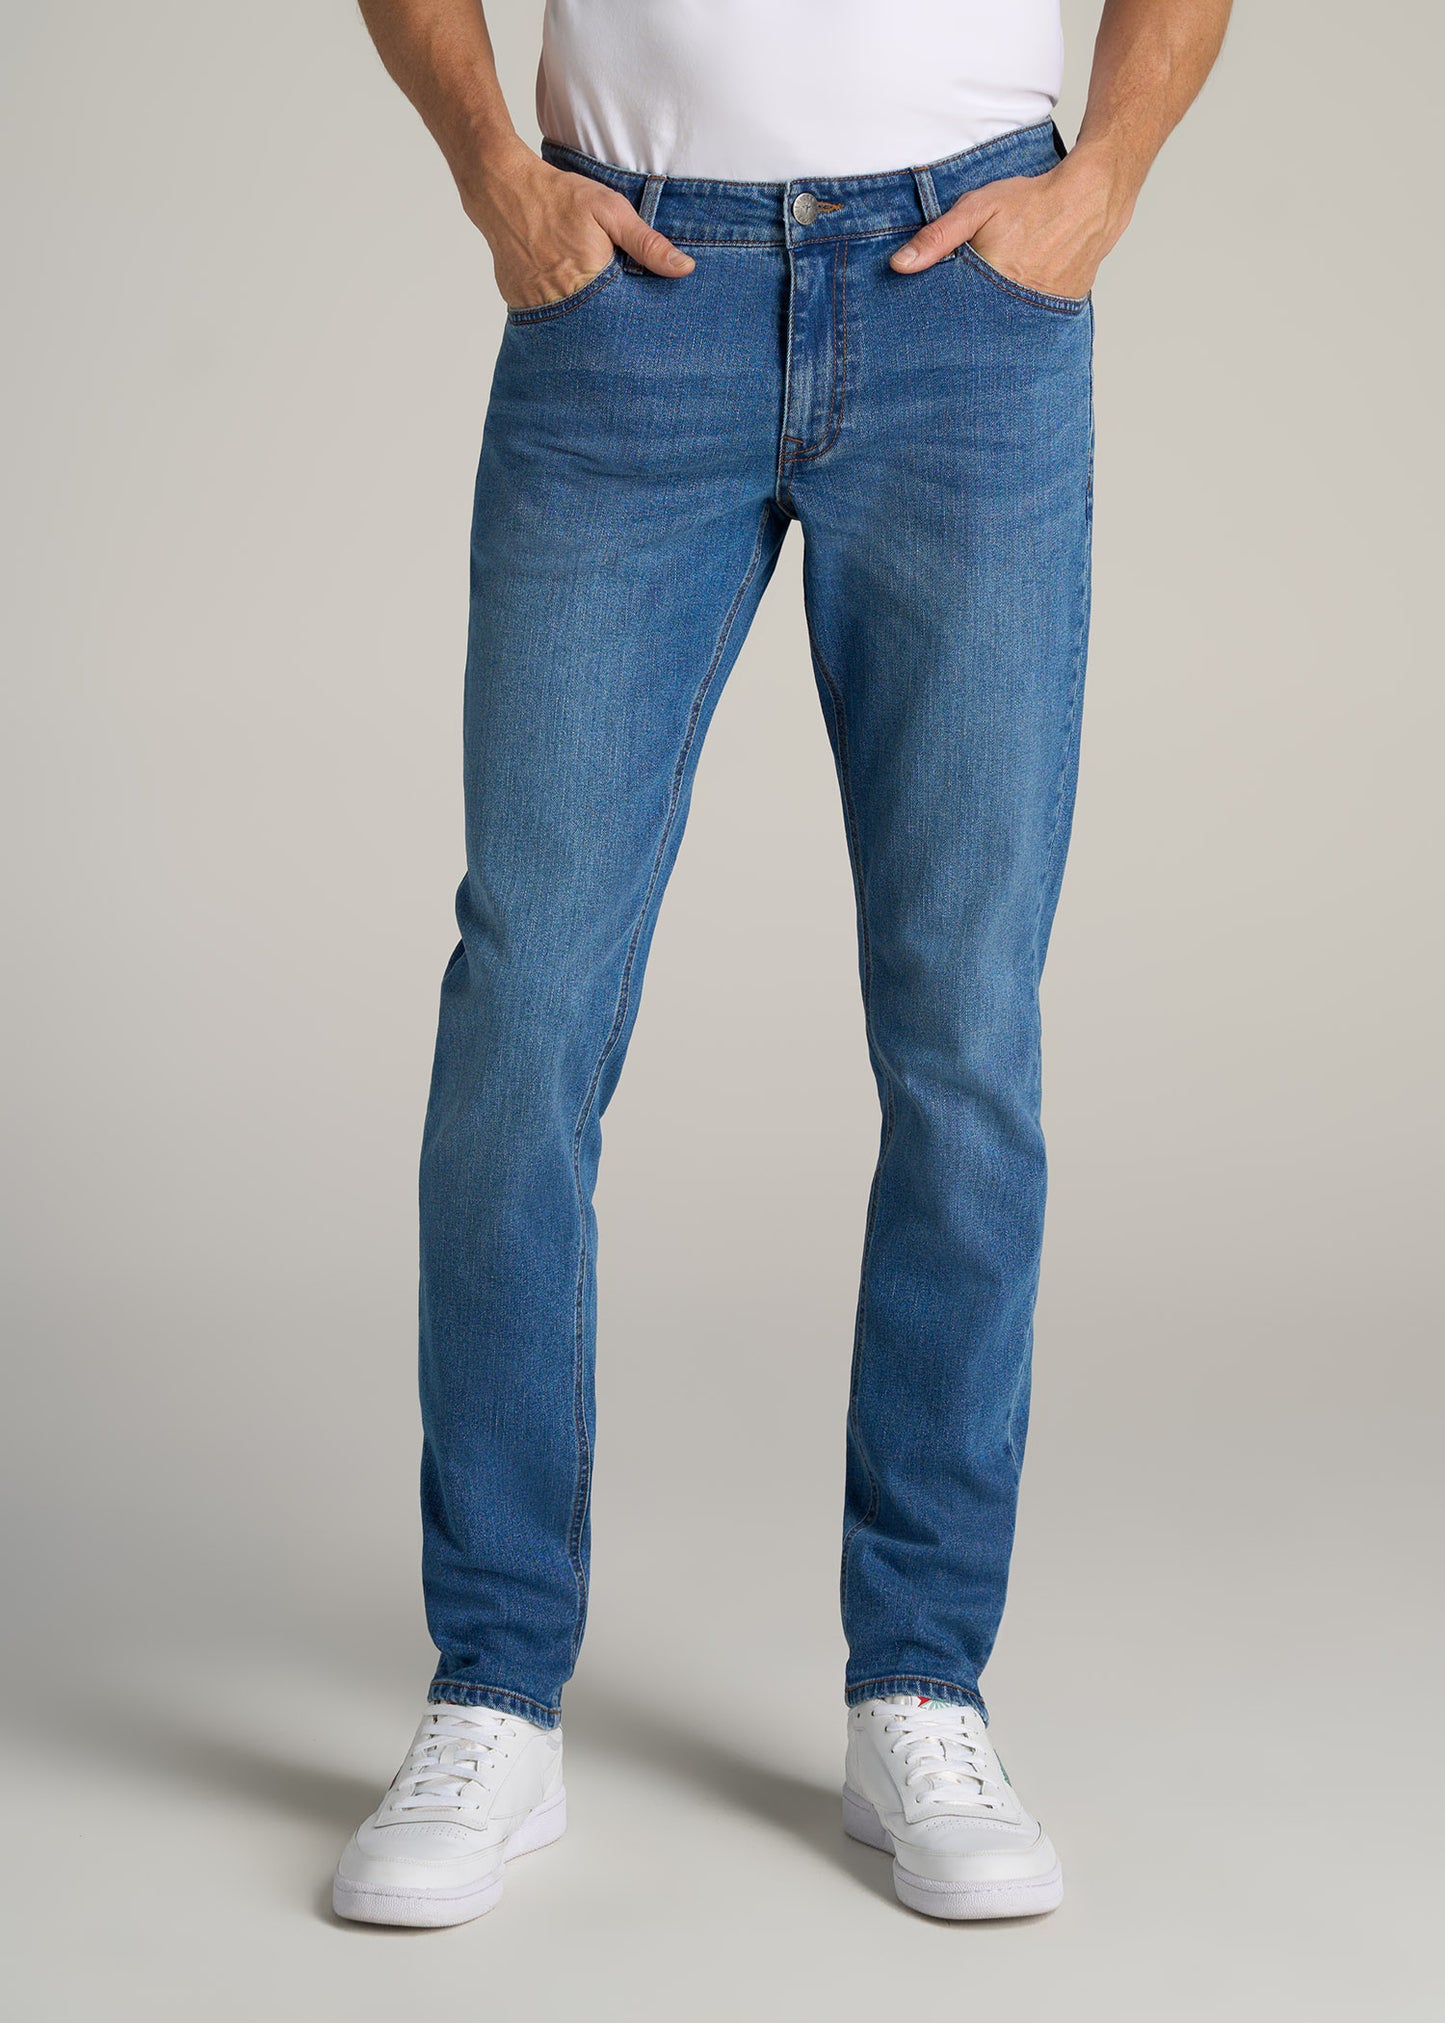       American-Tall-Men-Carman-Tapered-Fit-Jeans-Classic-Mid-Blue-front